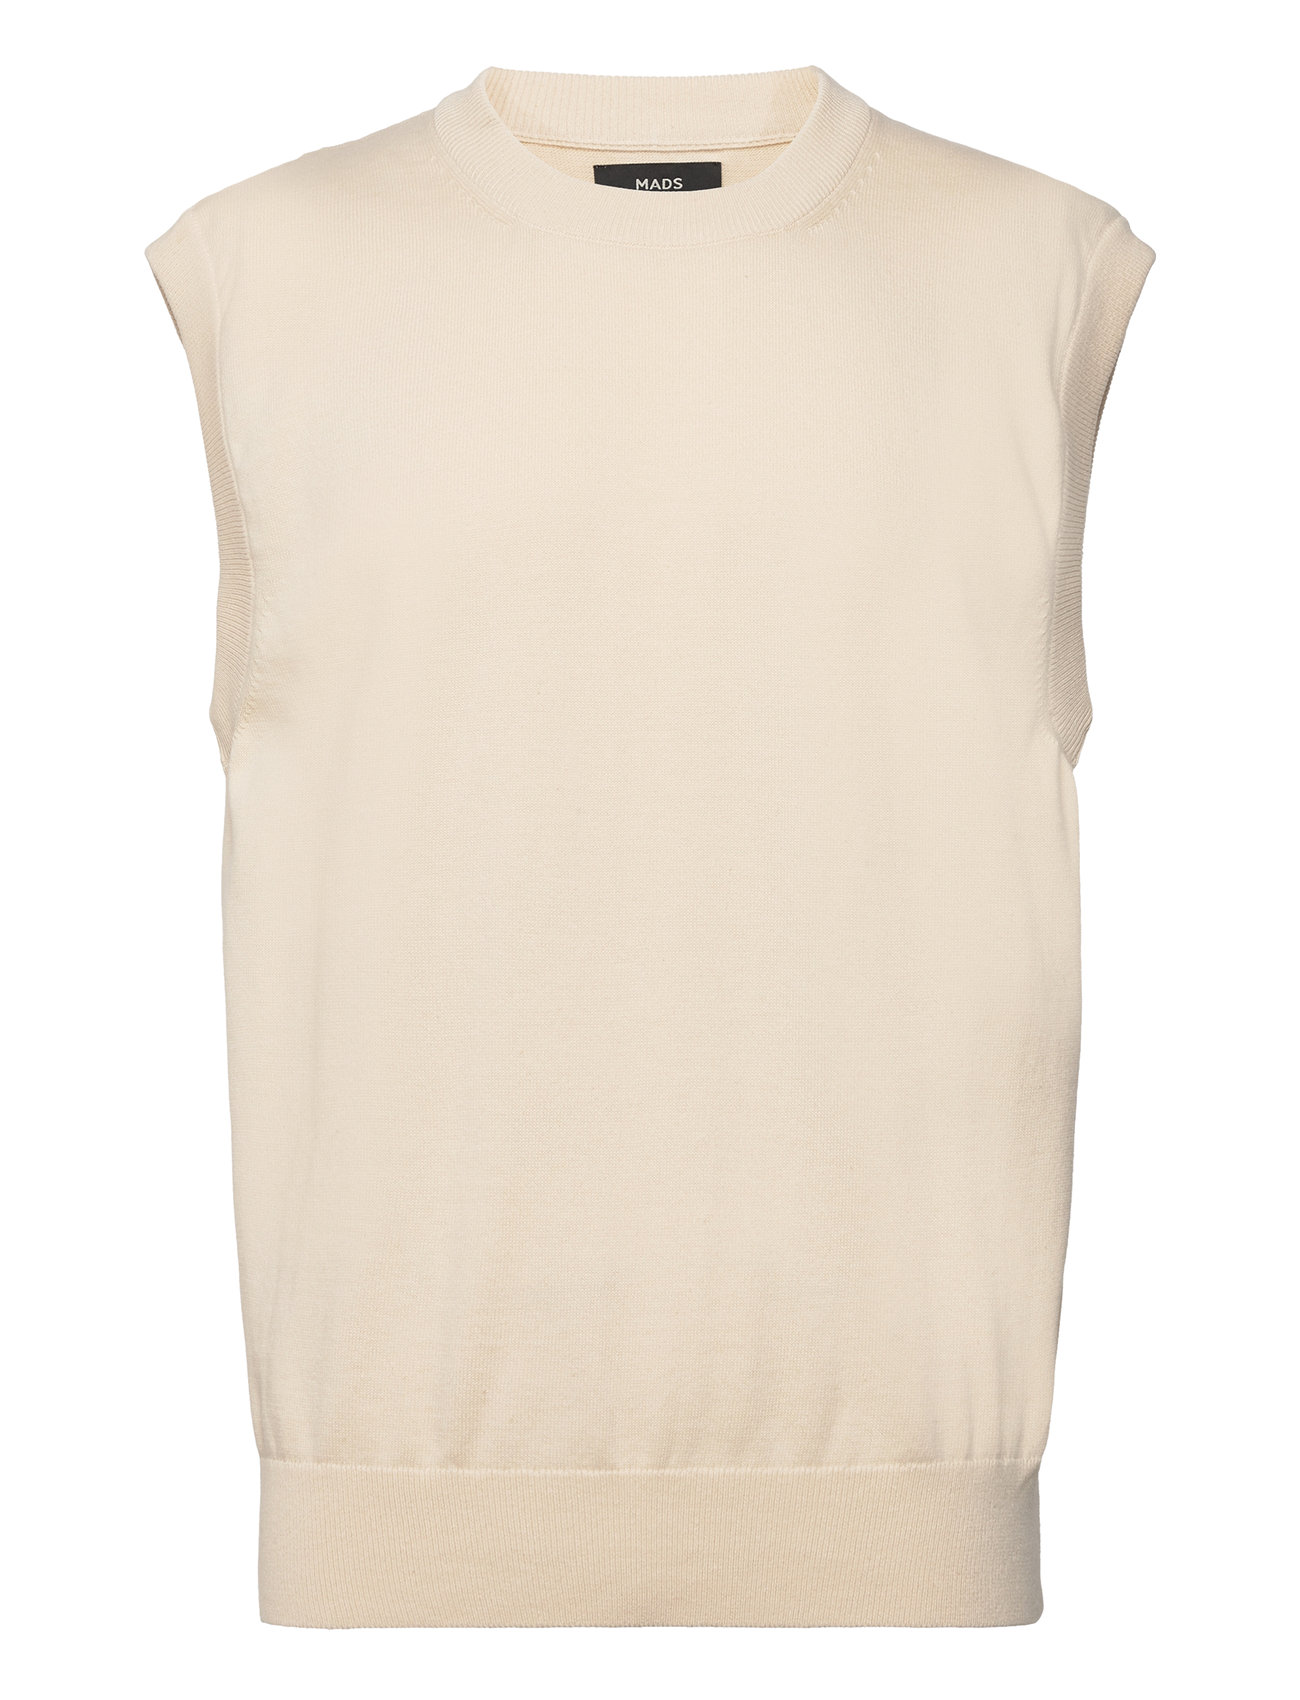 Tight Cotton William Vest Tops Knitwear Knitted Vests Cream Mads Nørgaard